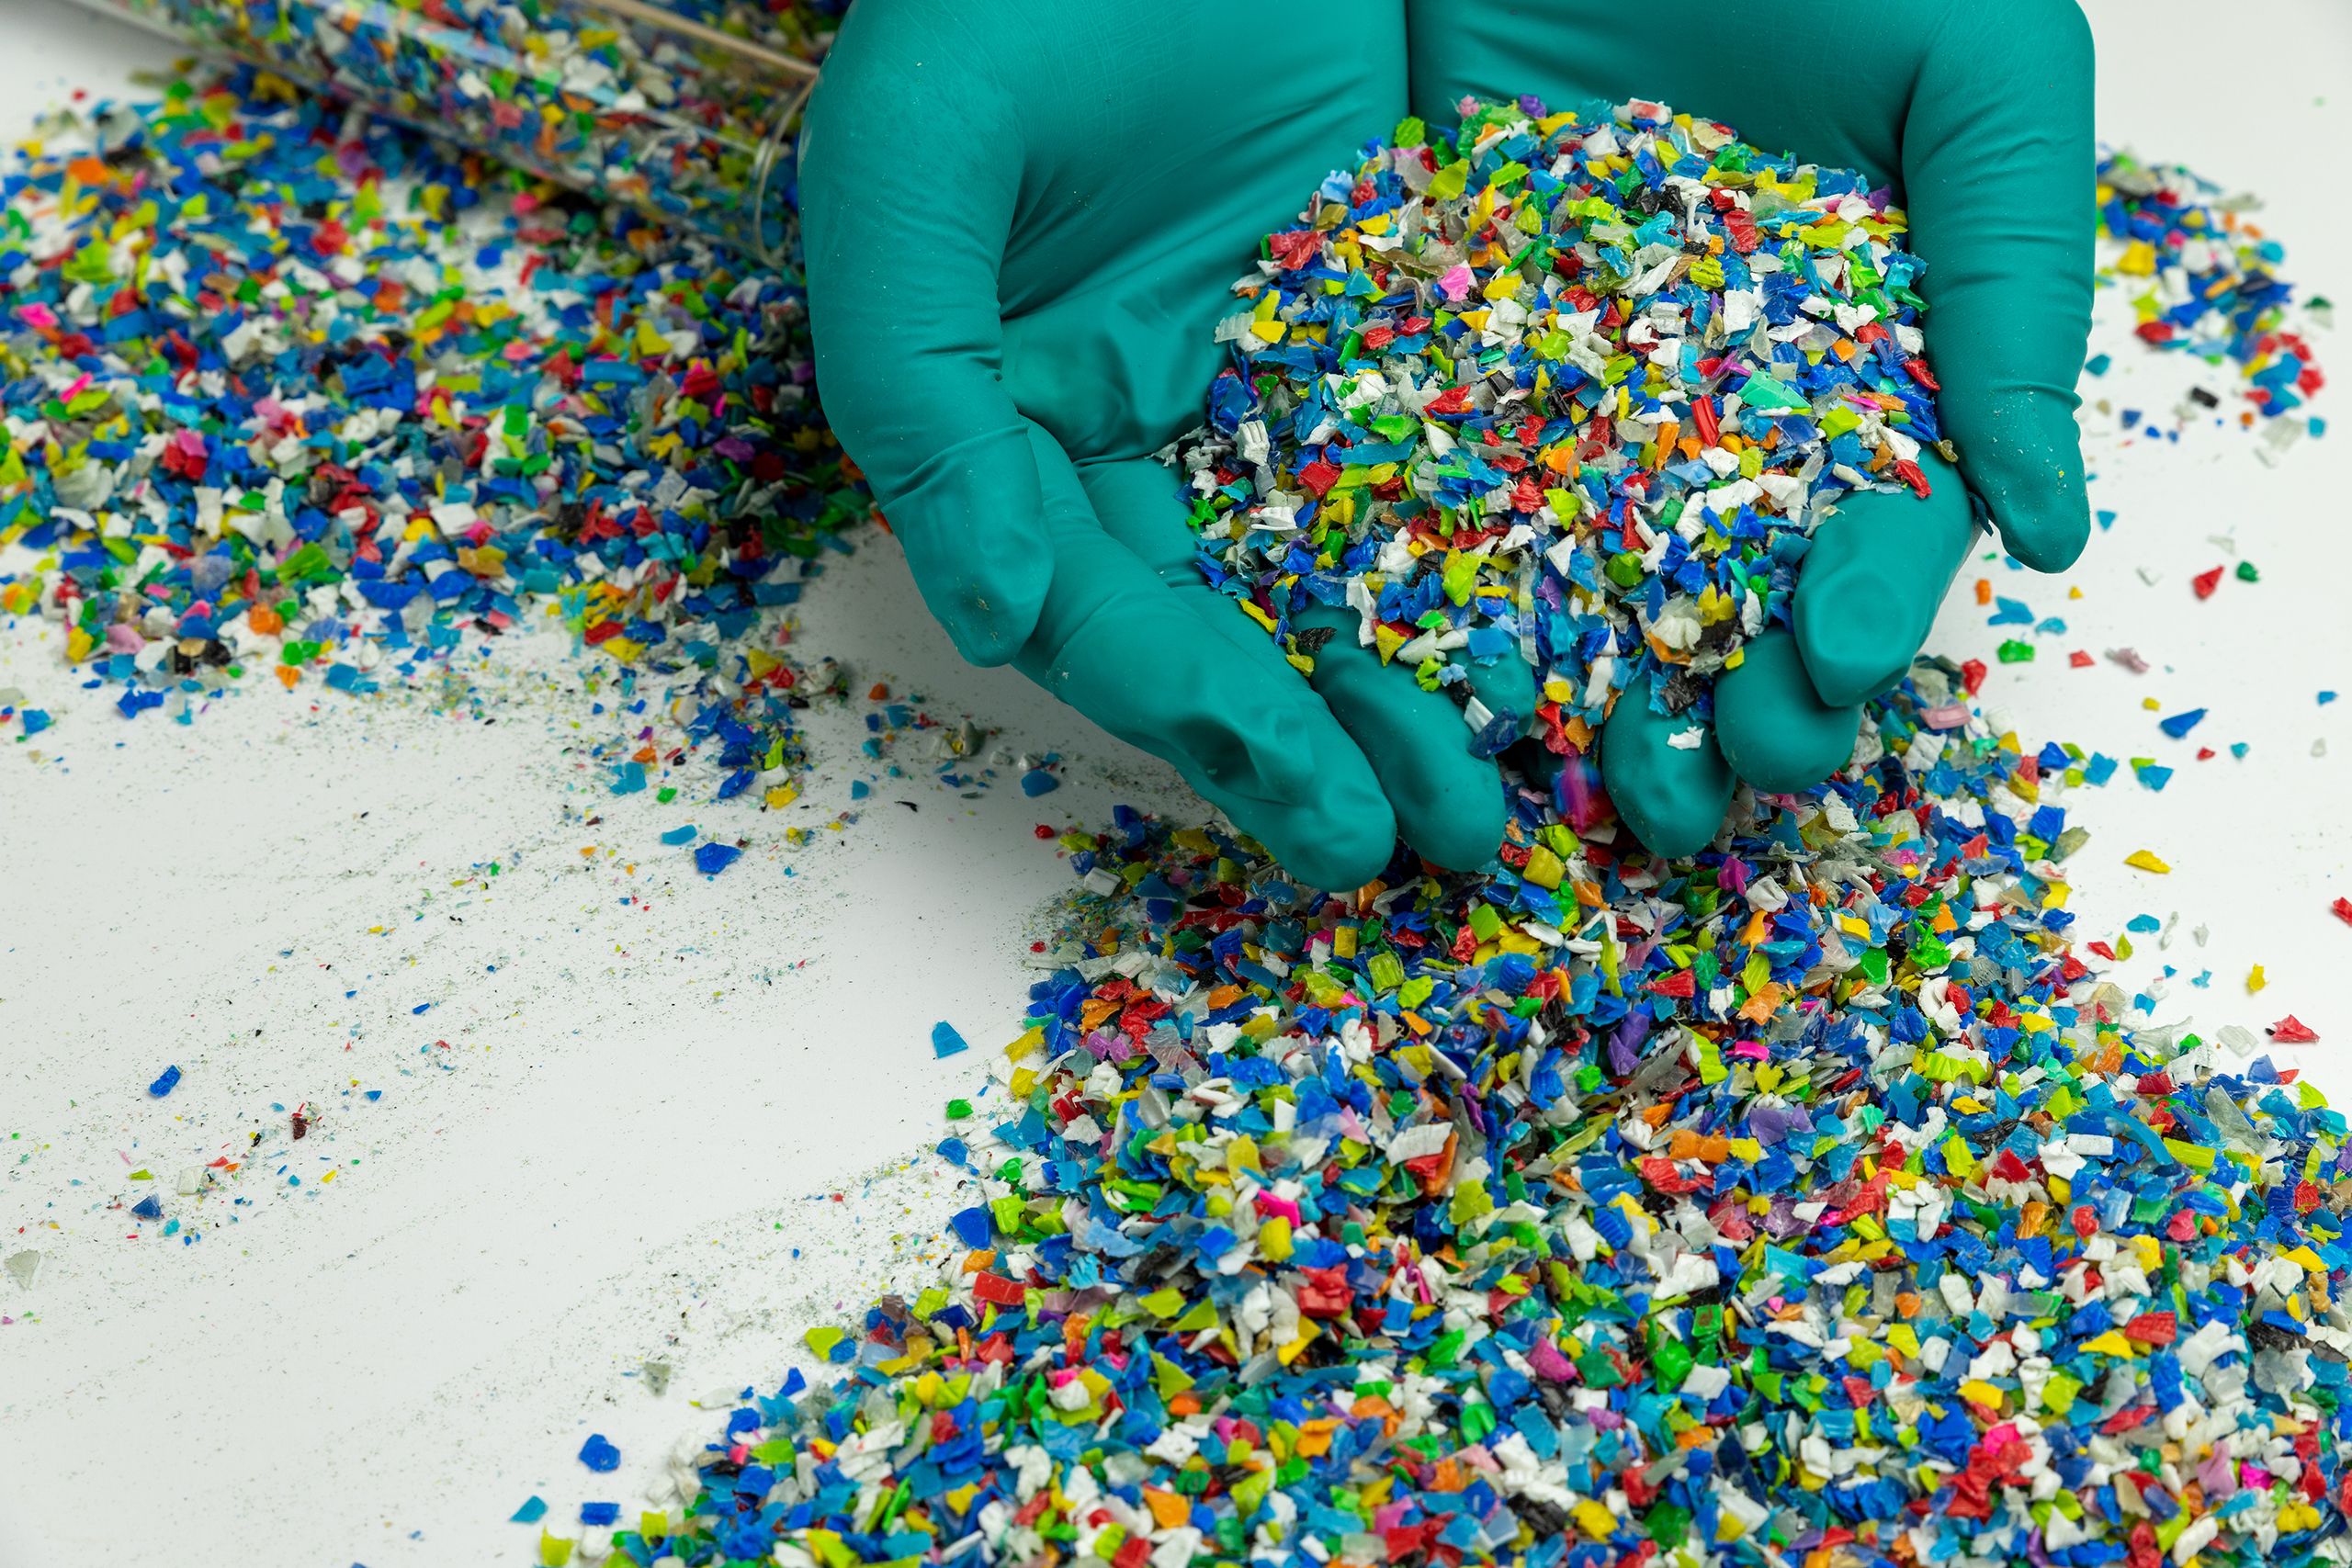 The concept of circular plastics continues to gain momentum. Plastic pellets are shown here.